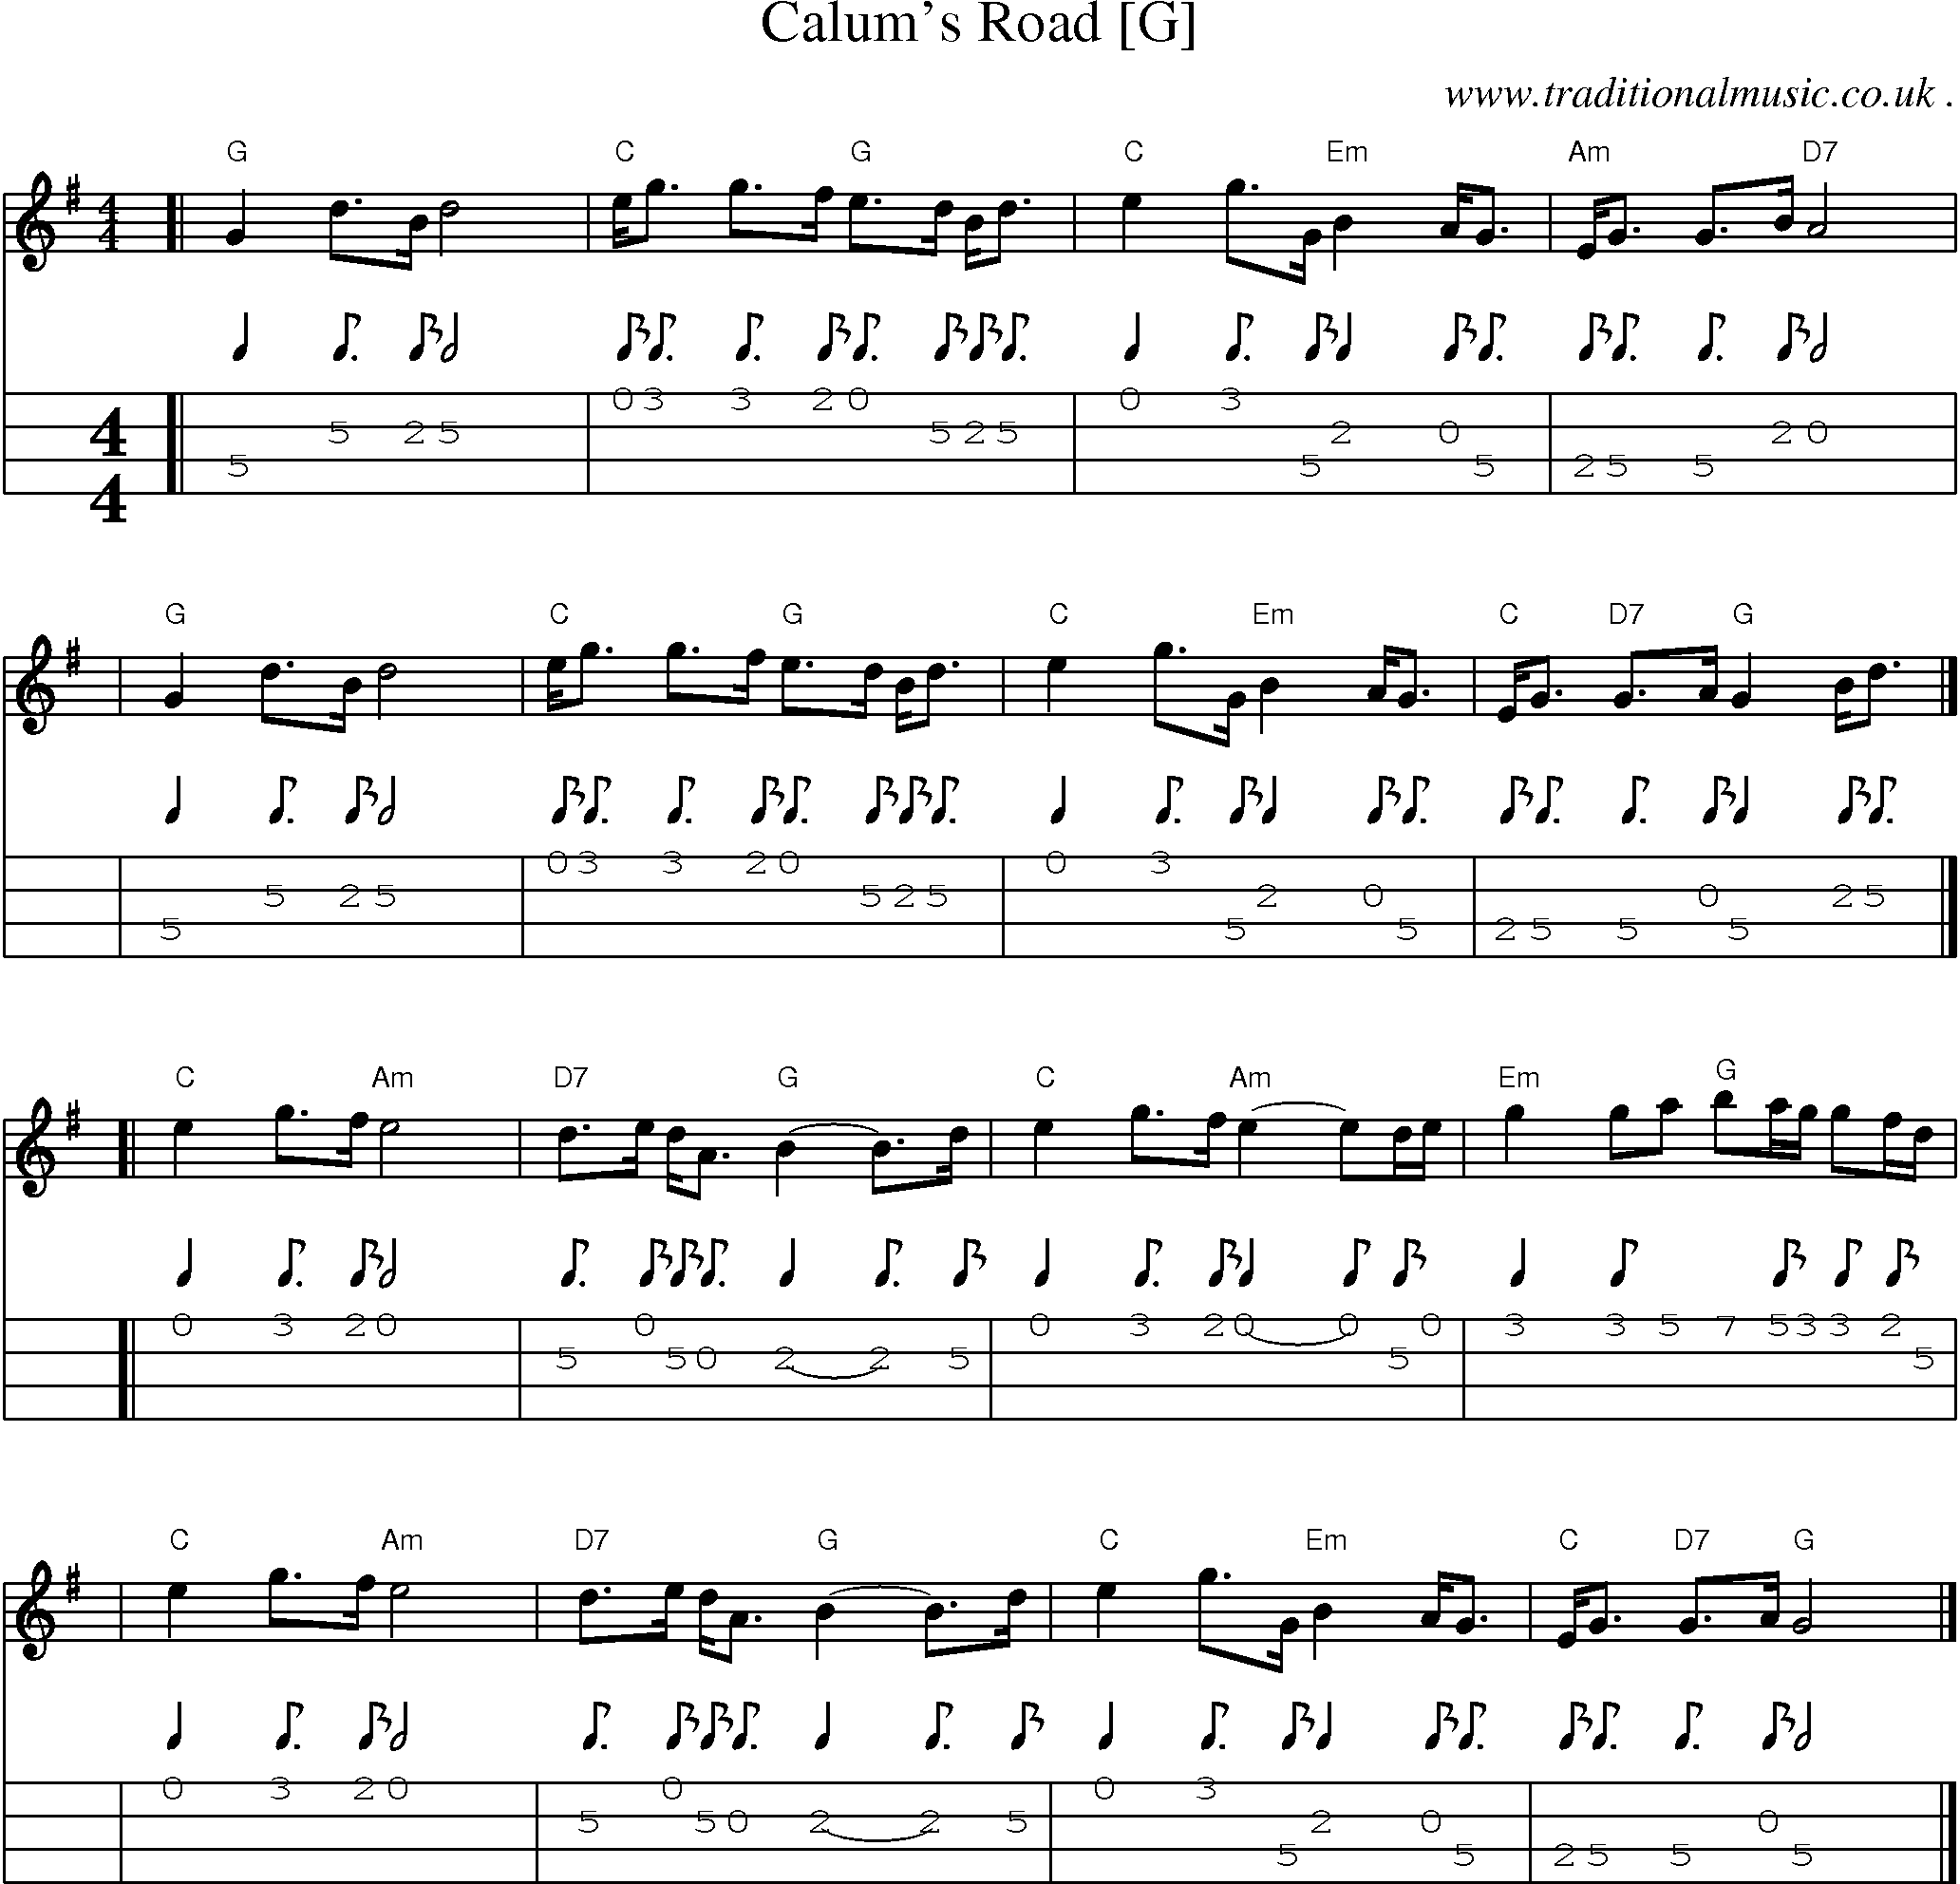 Sheet-music  score, Chords and Mandolin Tabs for Calums Road [g]